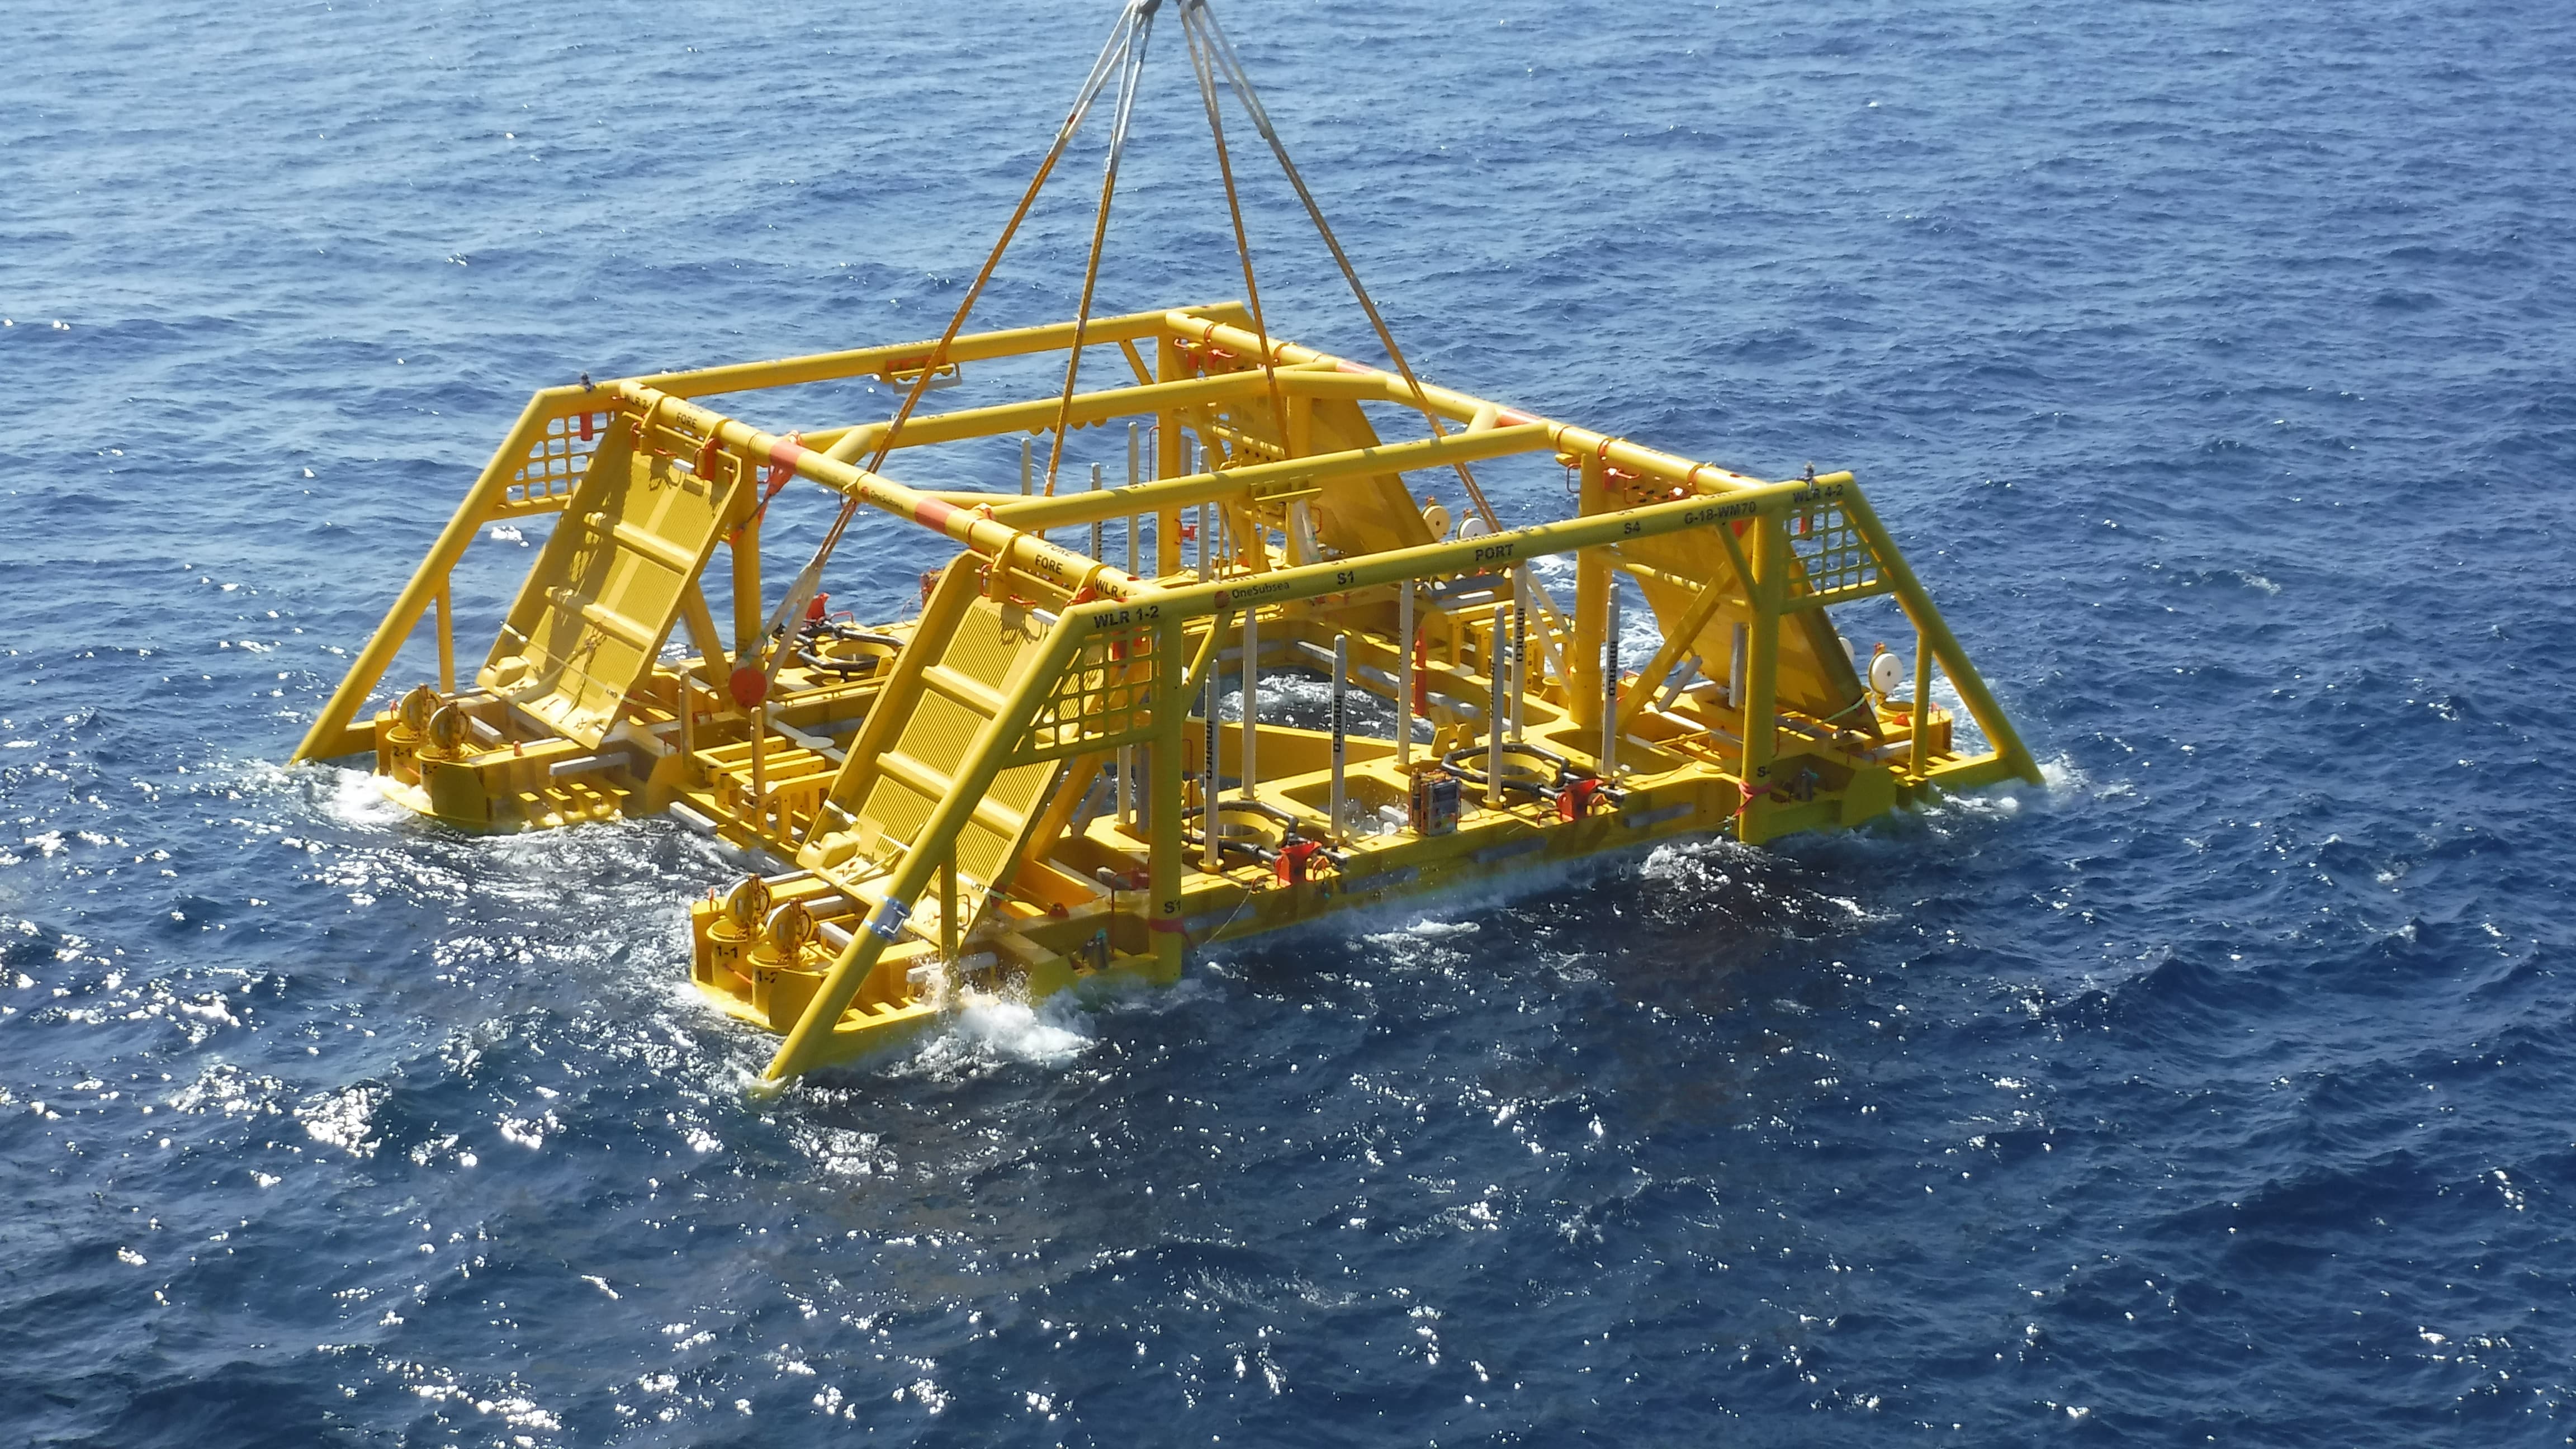 Subsea template being deployed min